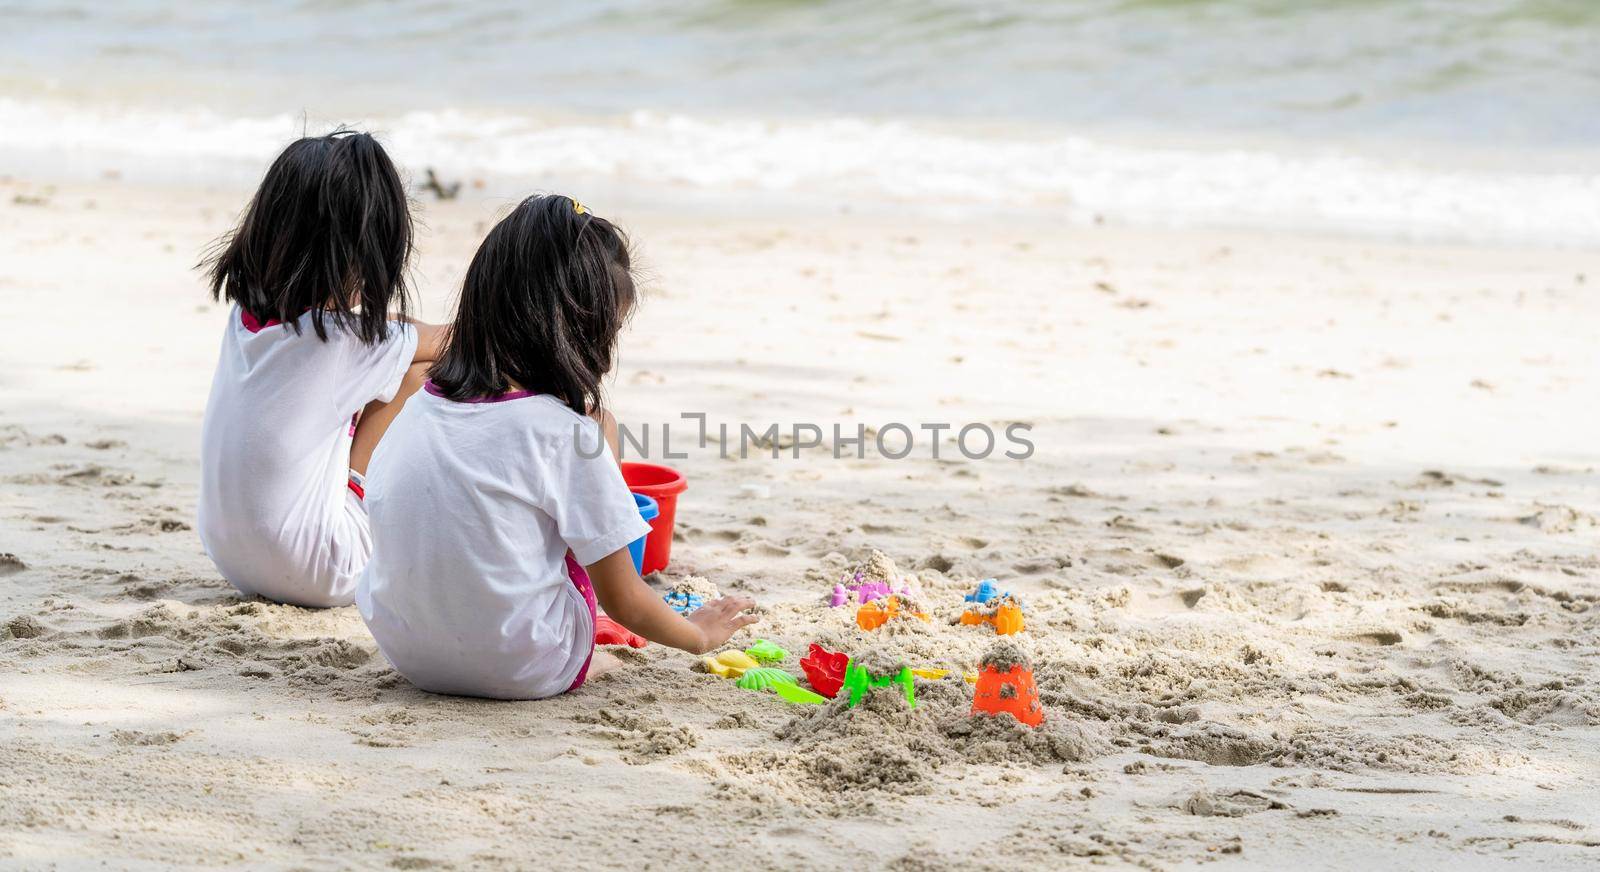 Twin girls while playing beach toys and sitting on a beach sand with white sand and waves by billroque